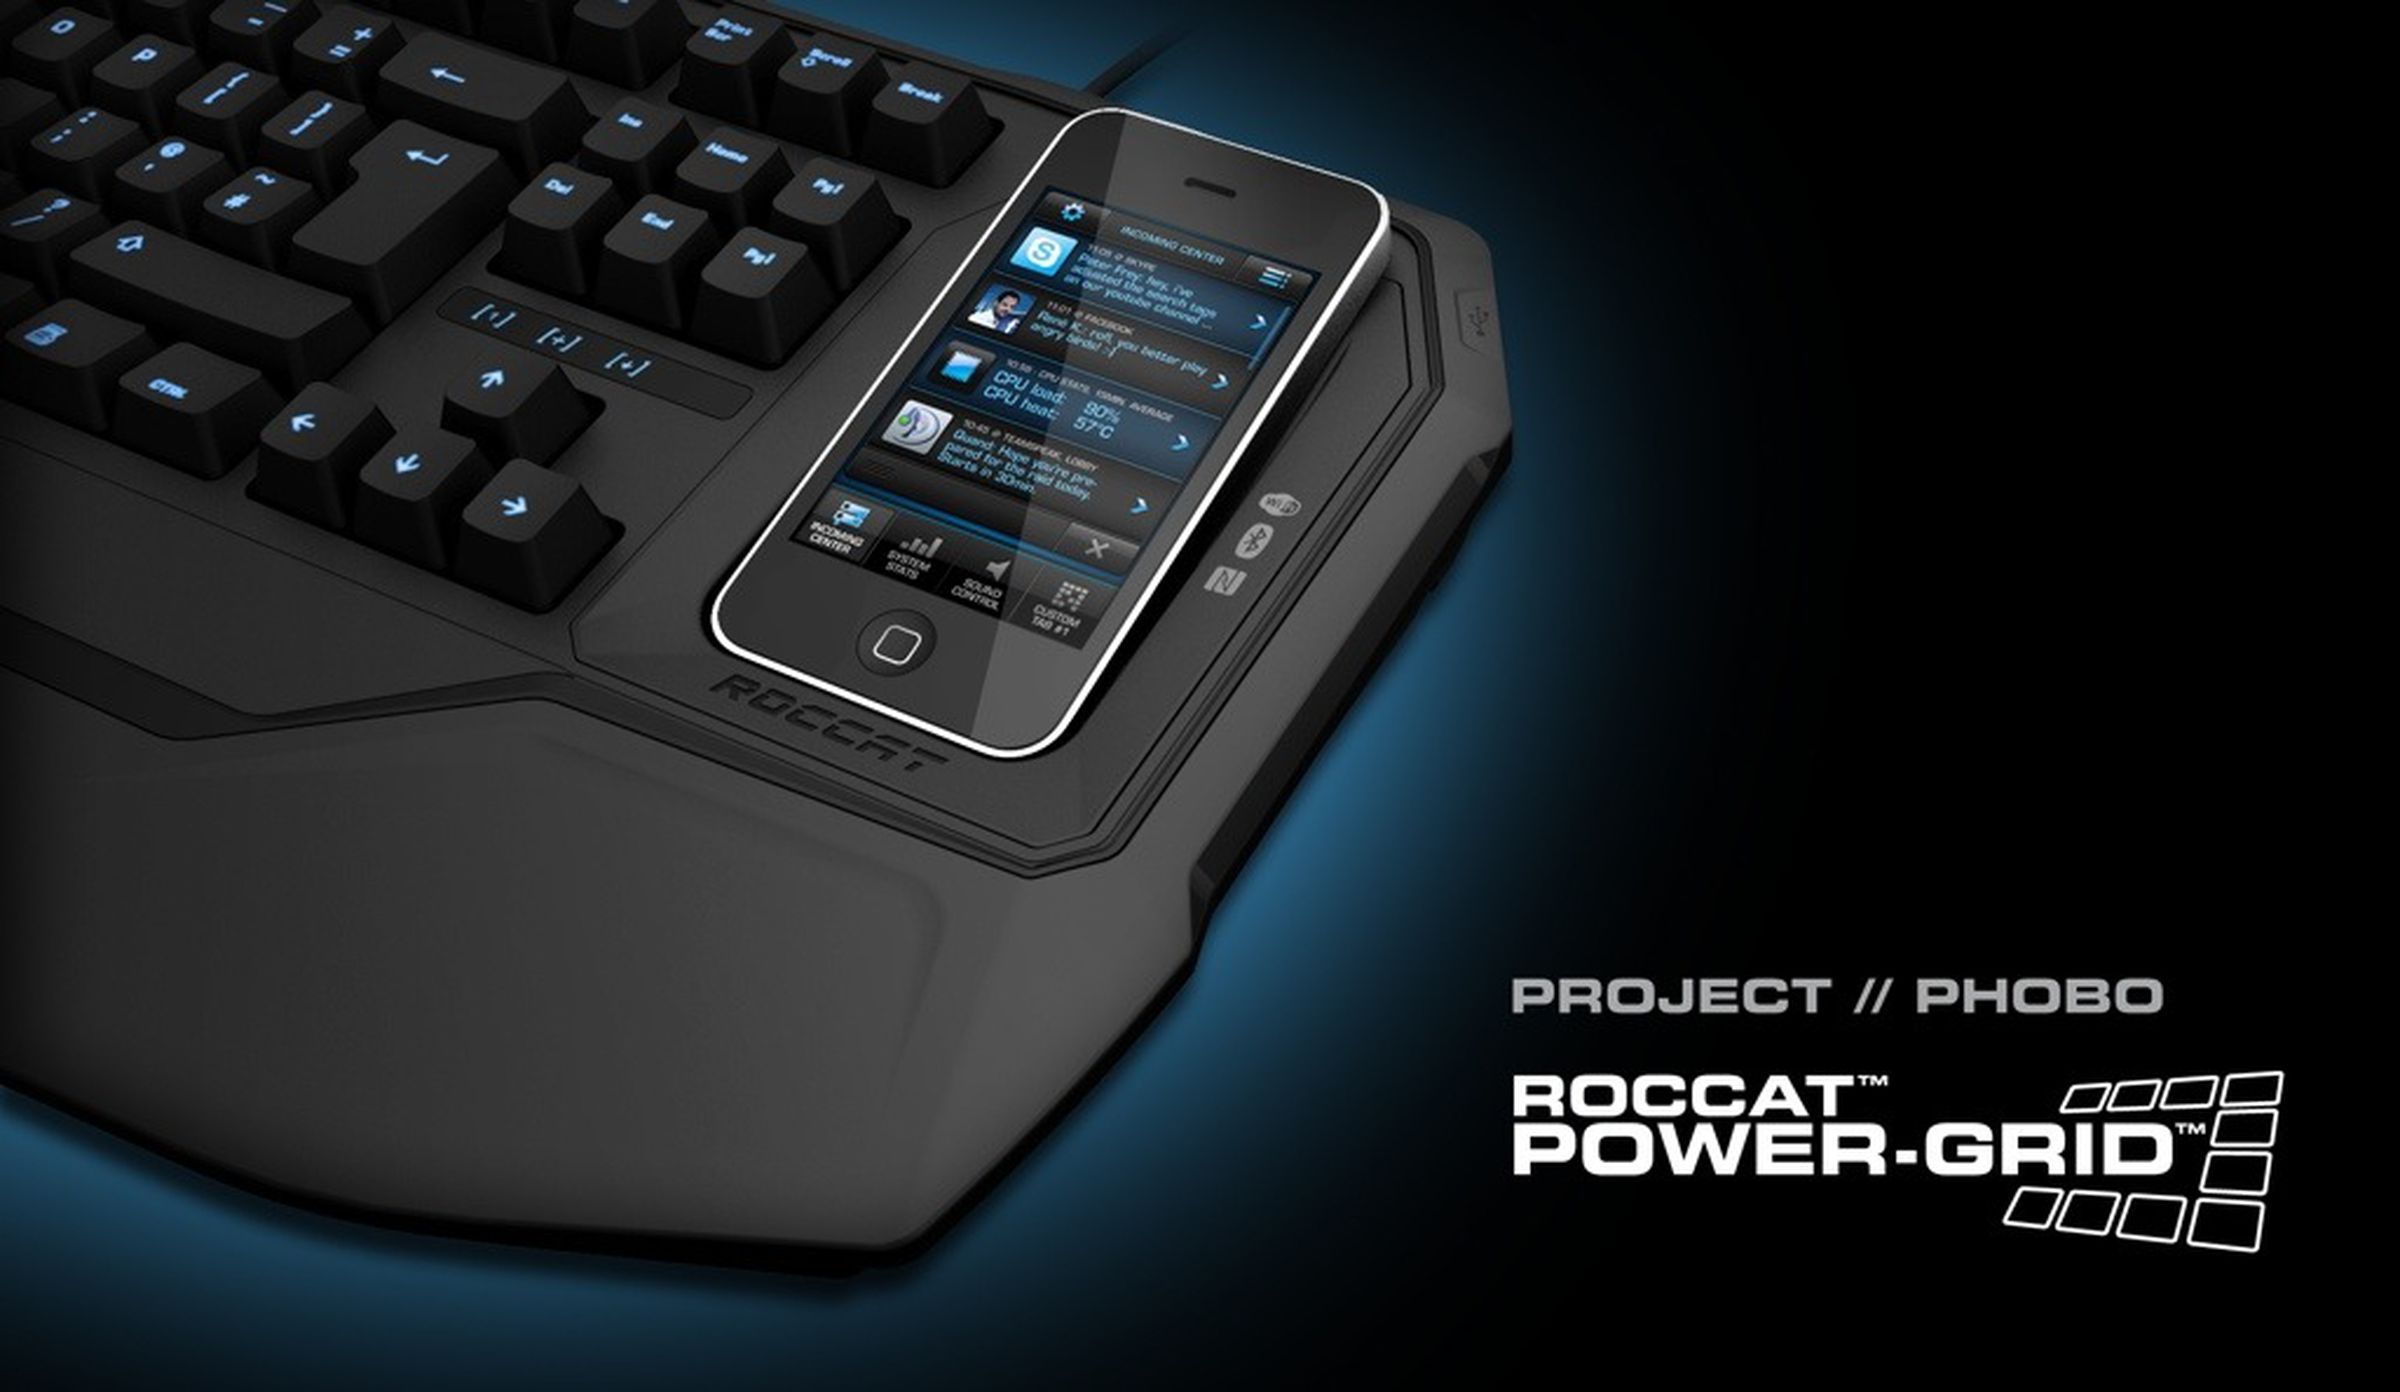 Roccat Power Grid and Project Phobo press pictures